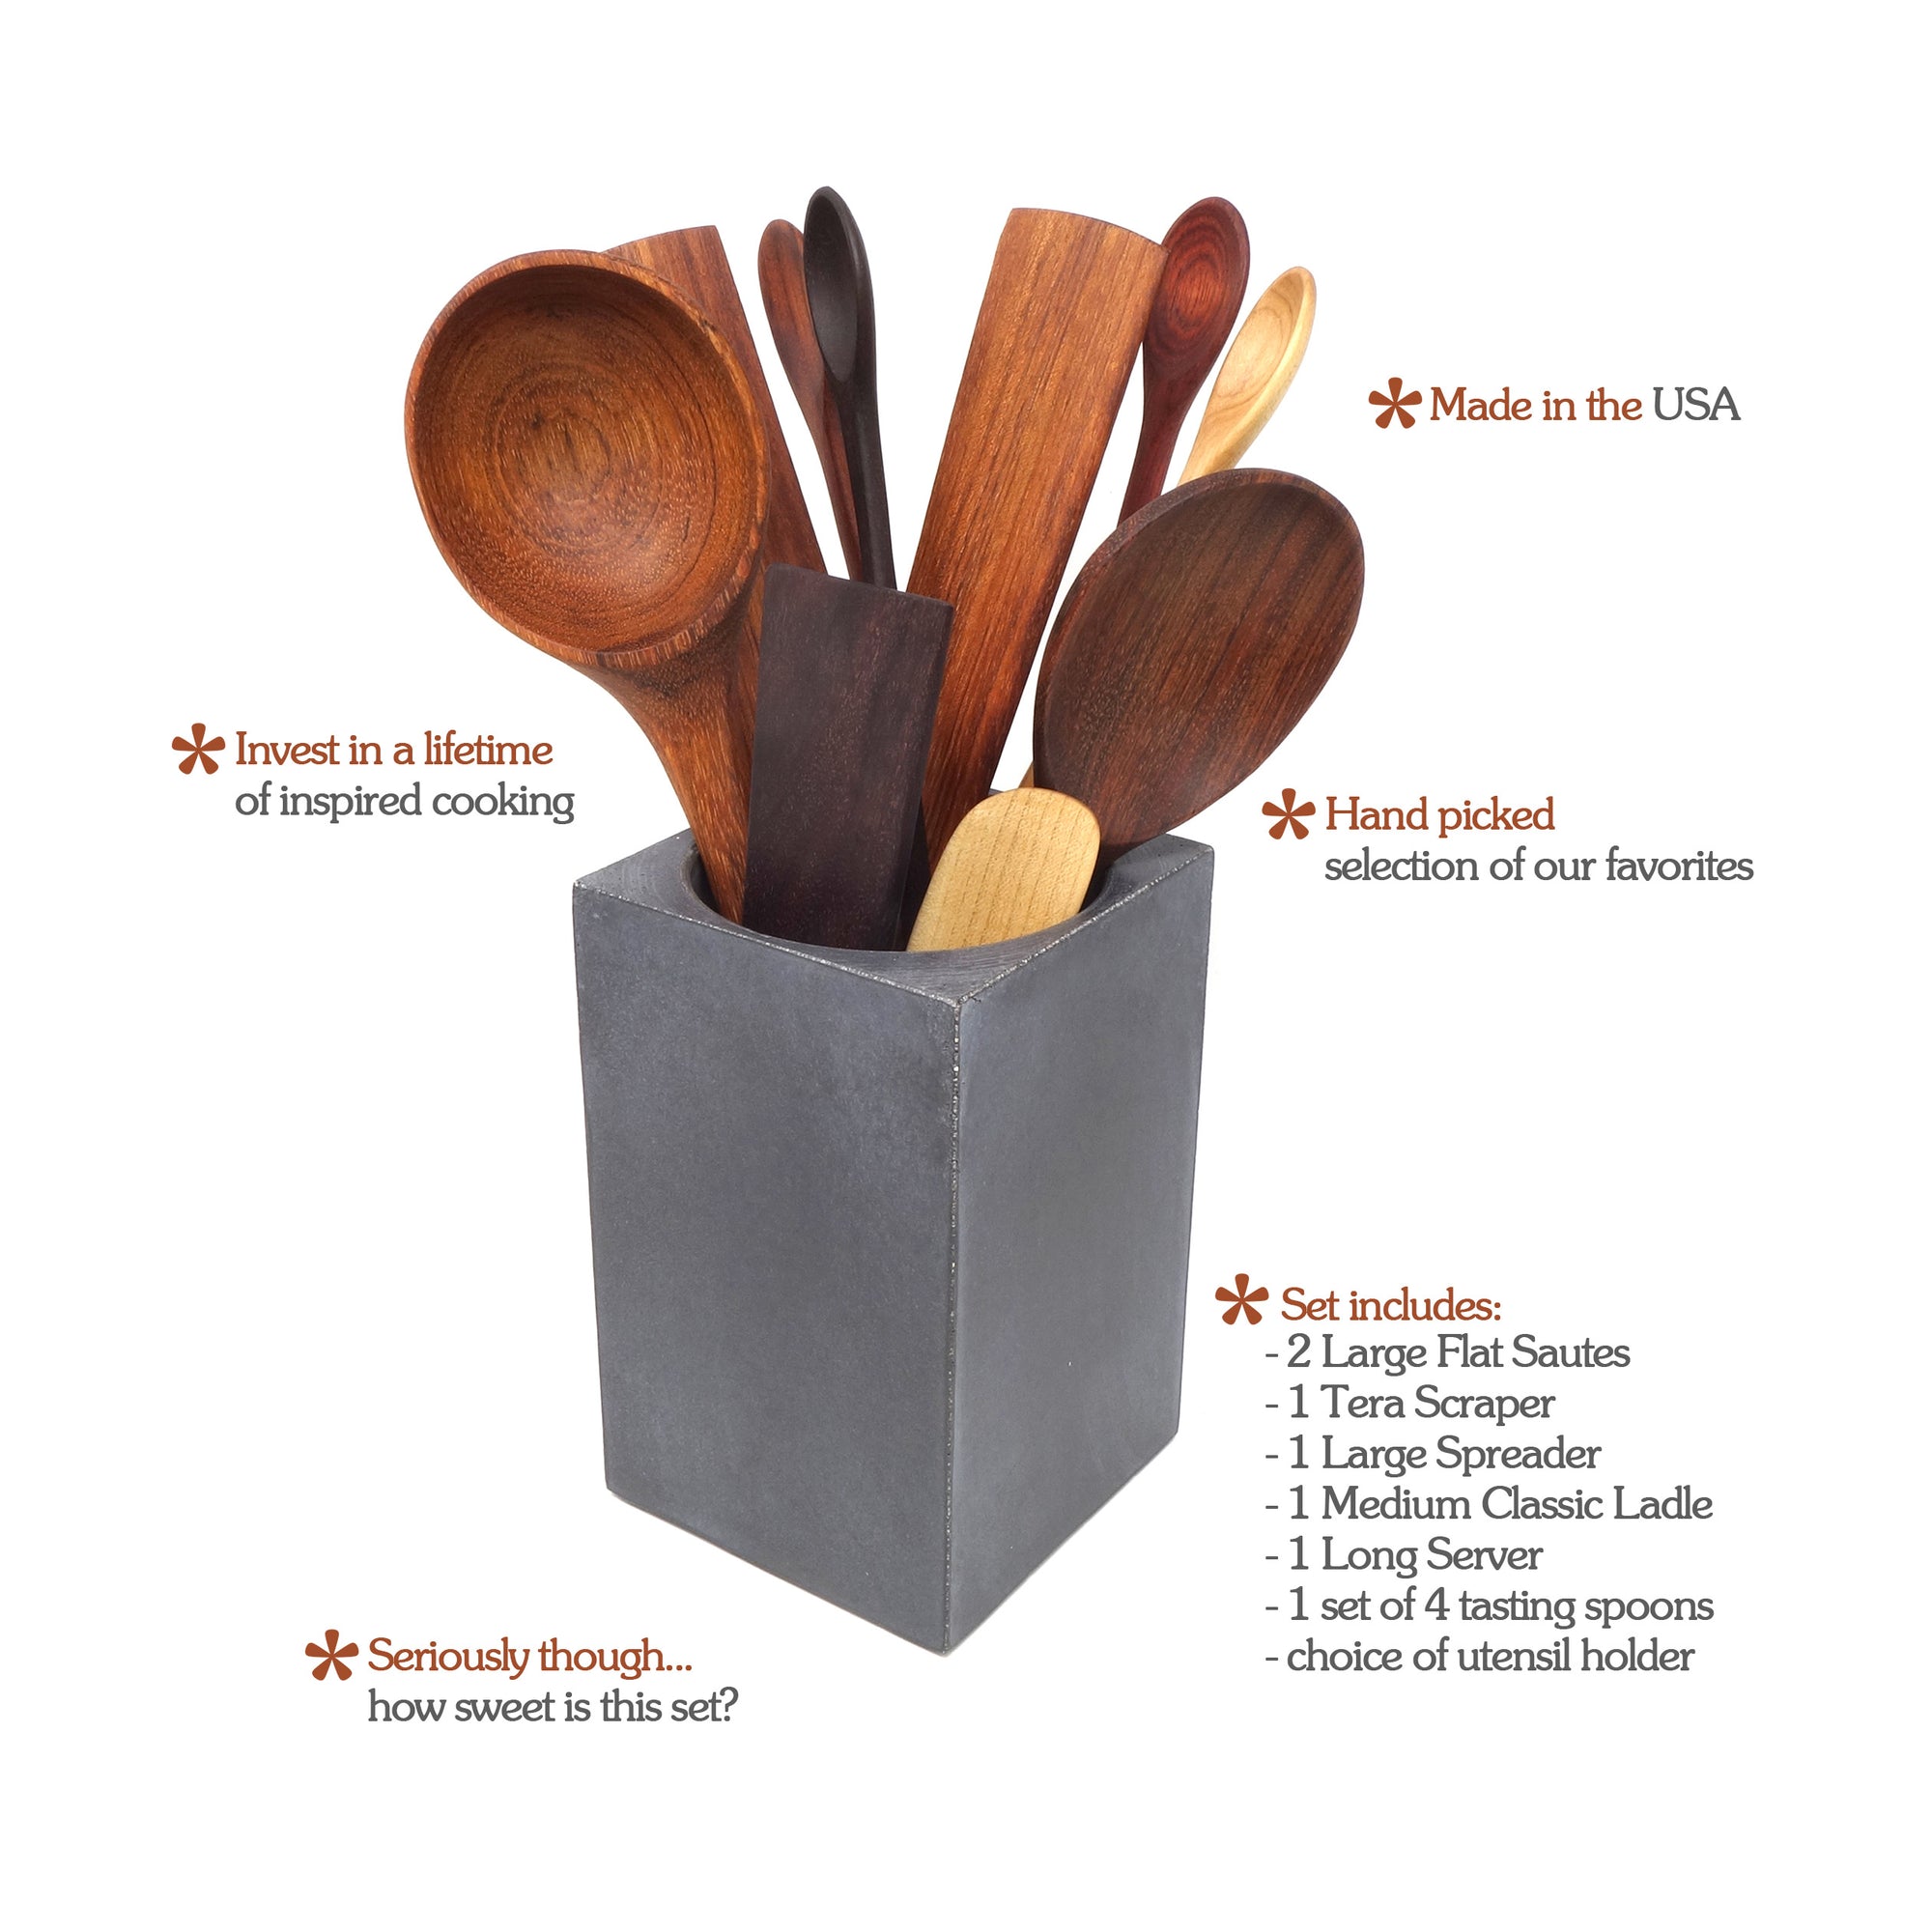 kitchen utensil caddy - Earlywood